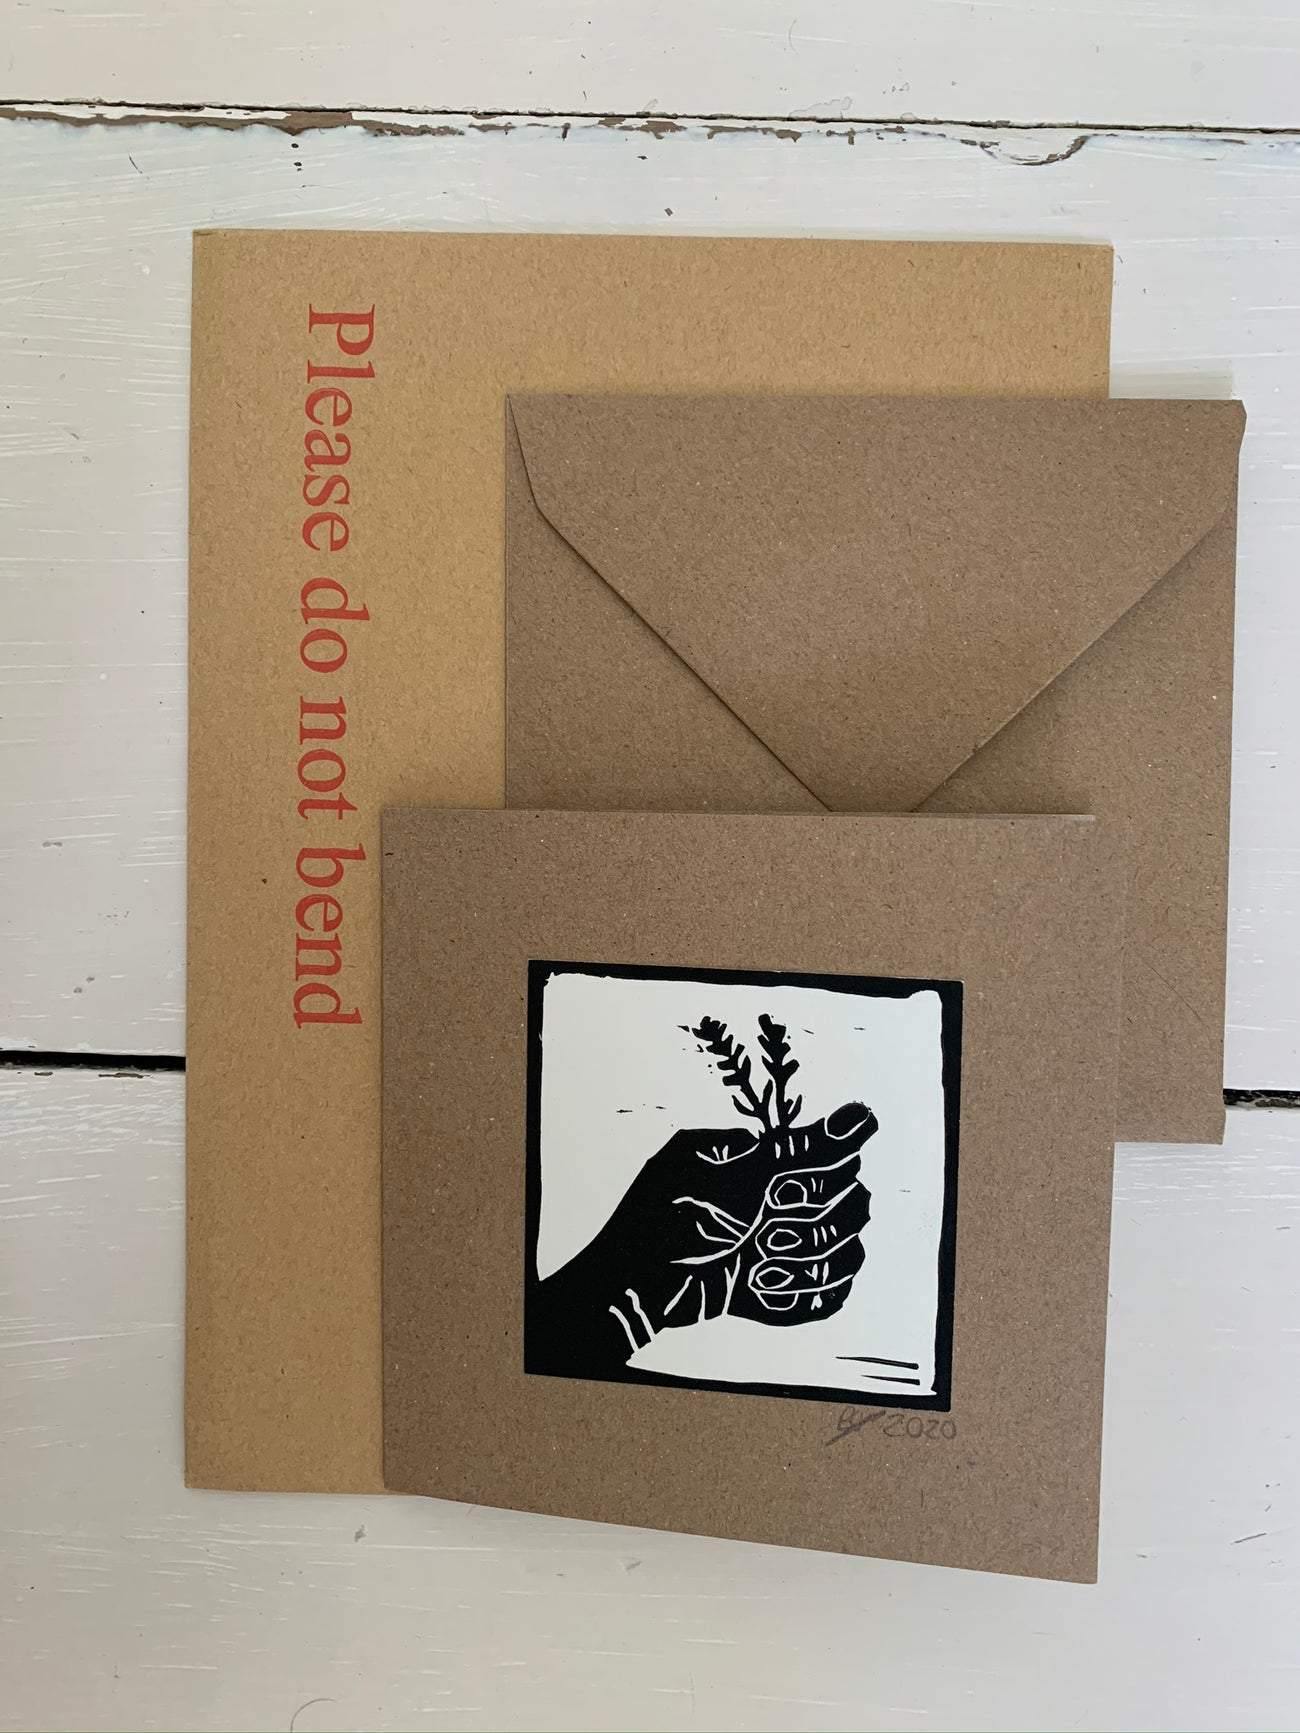 Minimalist nature themed greetings card with modern black and white illustration hand printed in East London & Brighton